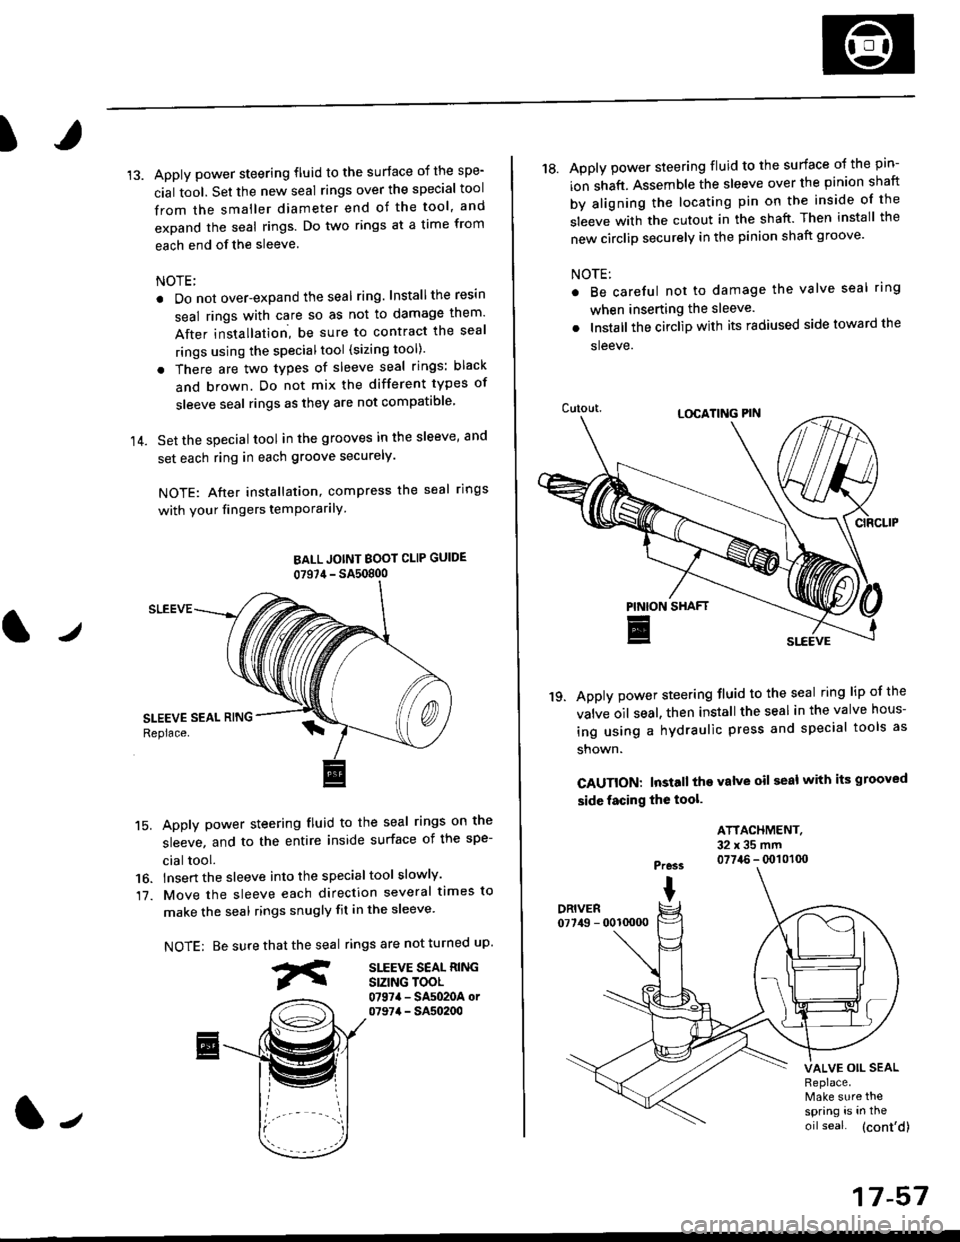 HONDA CIVIC 1996 6.G Owners Guide I
14.
Apply power steering fluid to the surface of the spe-
cial tool. Set the new seal rings over the special tool
from the smaller diameter end of the tool, and
expand the seal rings. Do two rings a